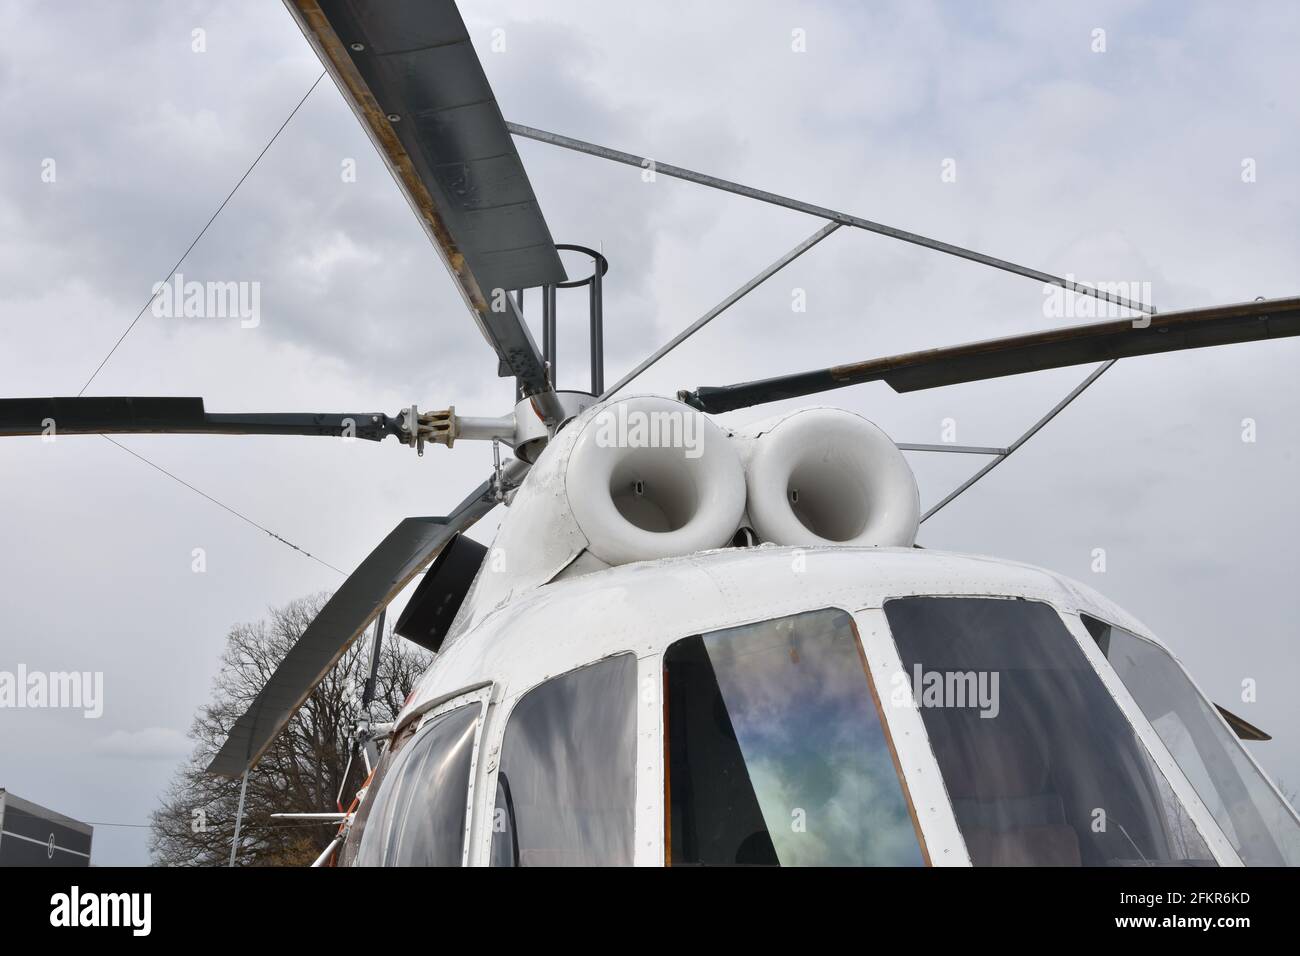 Close up front view on main rotor blades, rotor mast and part of cockpit windows of the Russian white twin-engine multipurpose helicopter Mi-8. Stock Photo